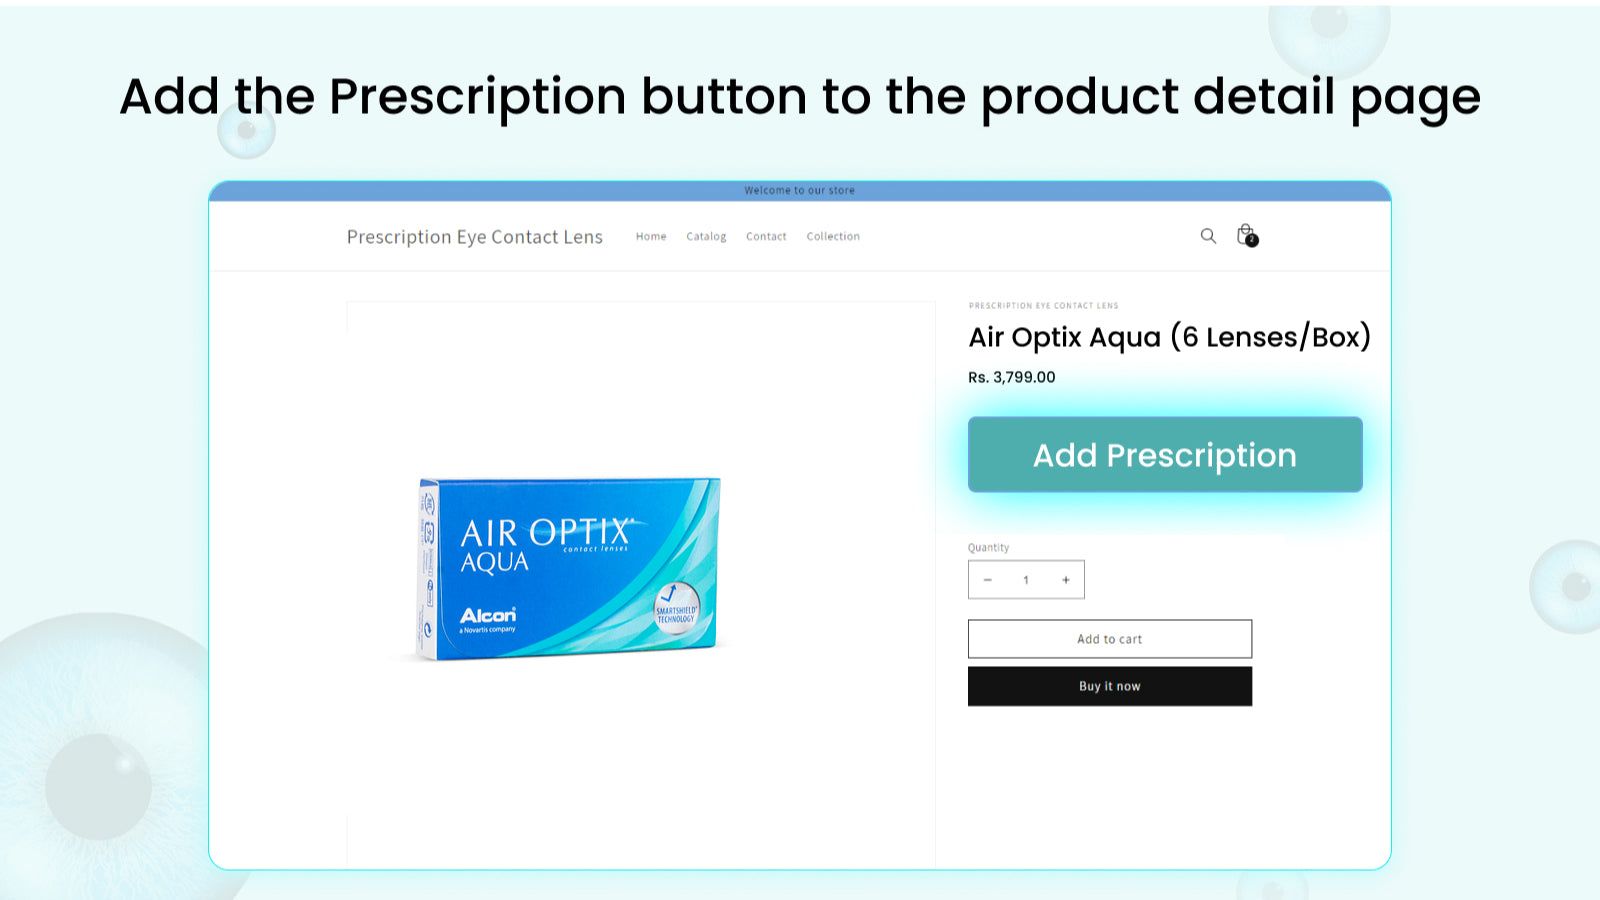 Add the Prescription button to the product detail page